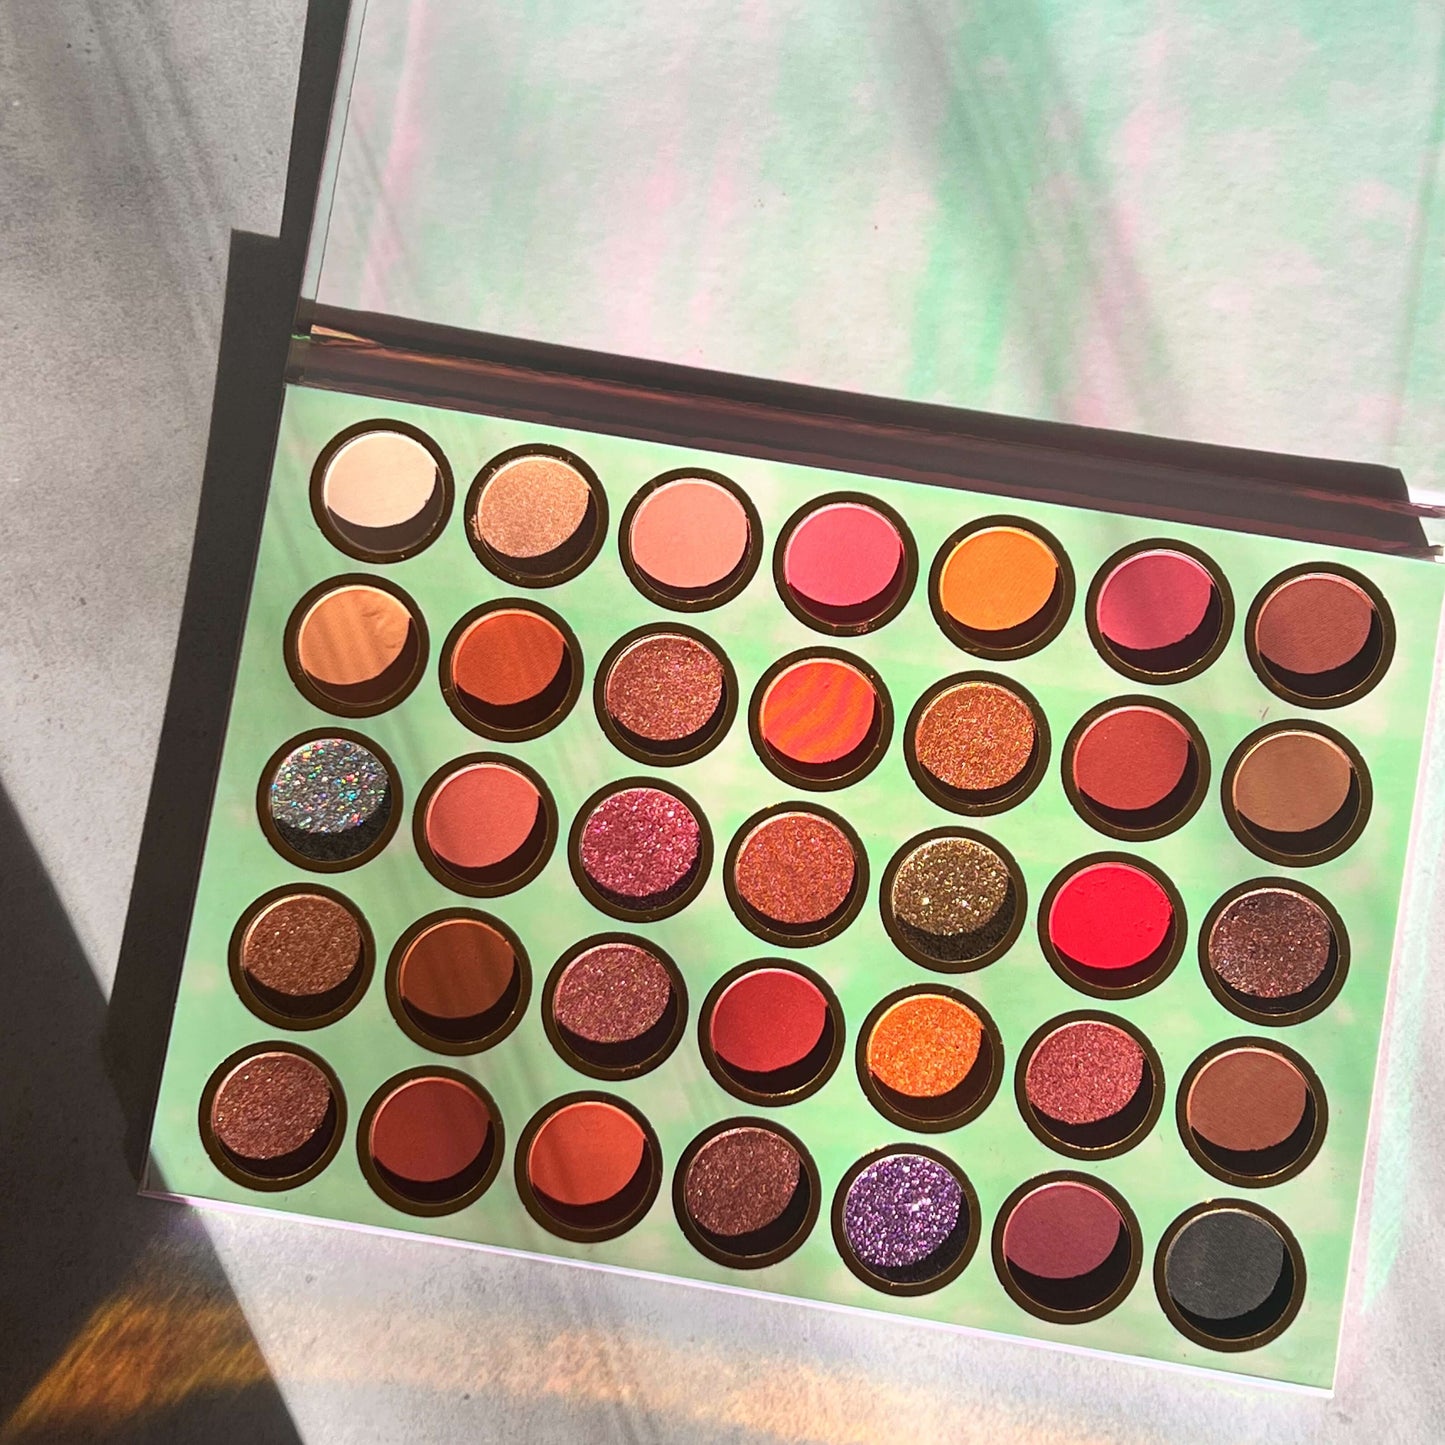 In the inside of the eye palette you can see 35 colors. they are each in a round shape.